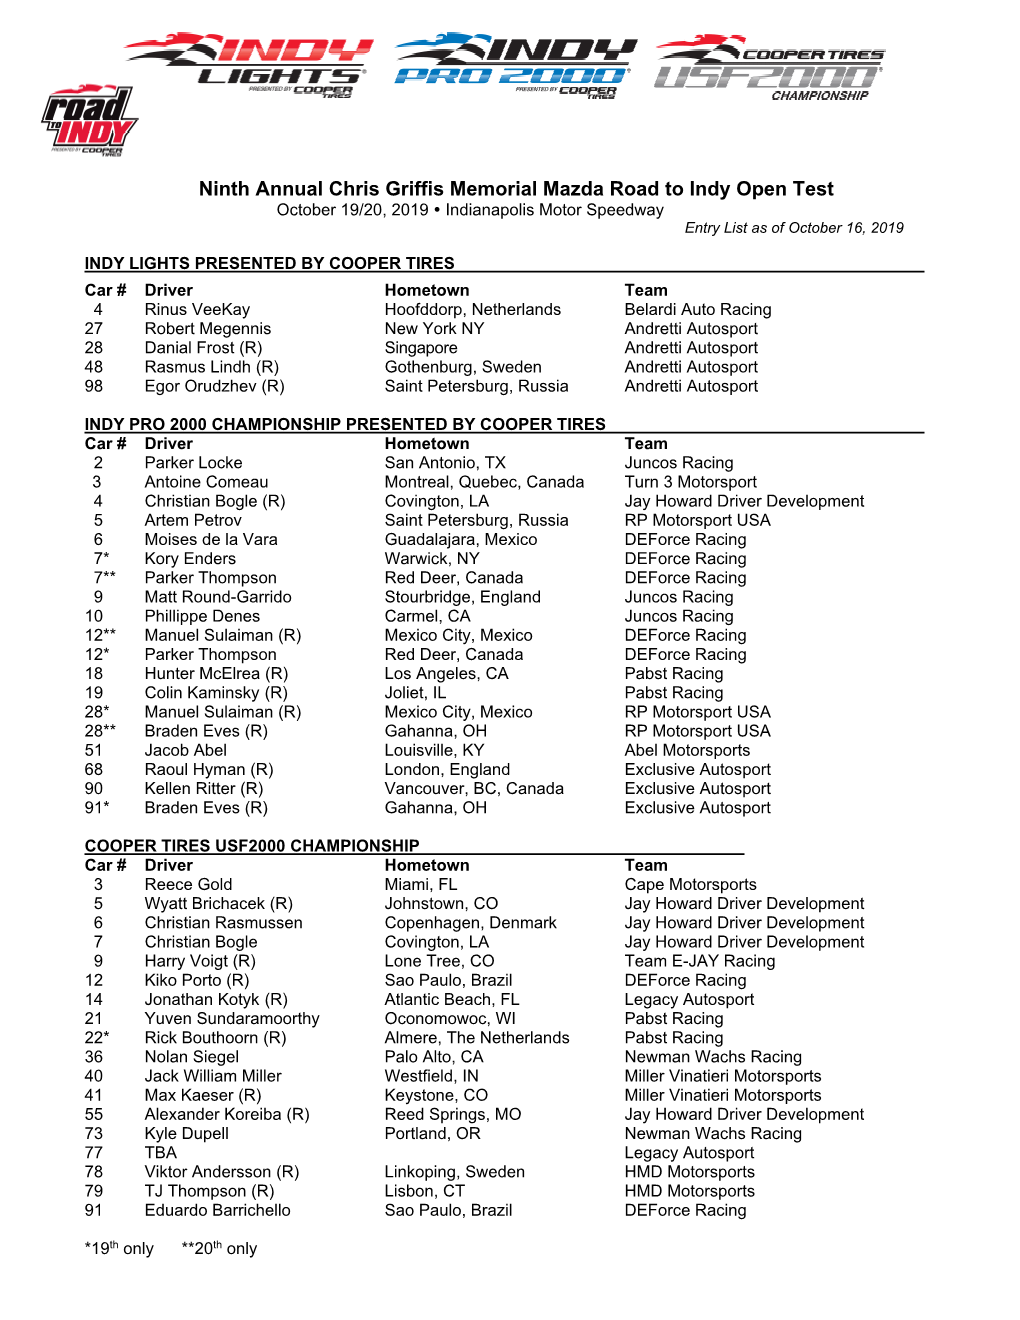 Ninth Annual Chris Griffis Memorial Mazda Road to Indy Open Test October 19/20 , 201 9  Indianapolis Motor Speedway Entry List As of October 1 6 , 2019